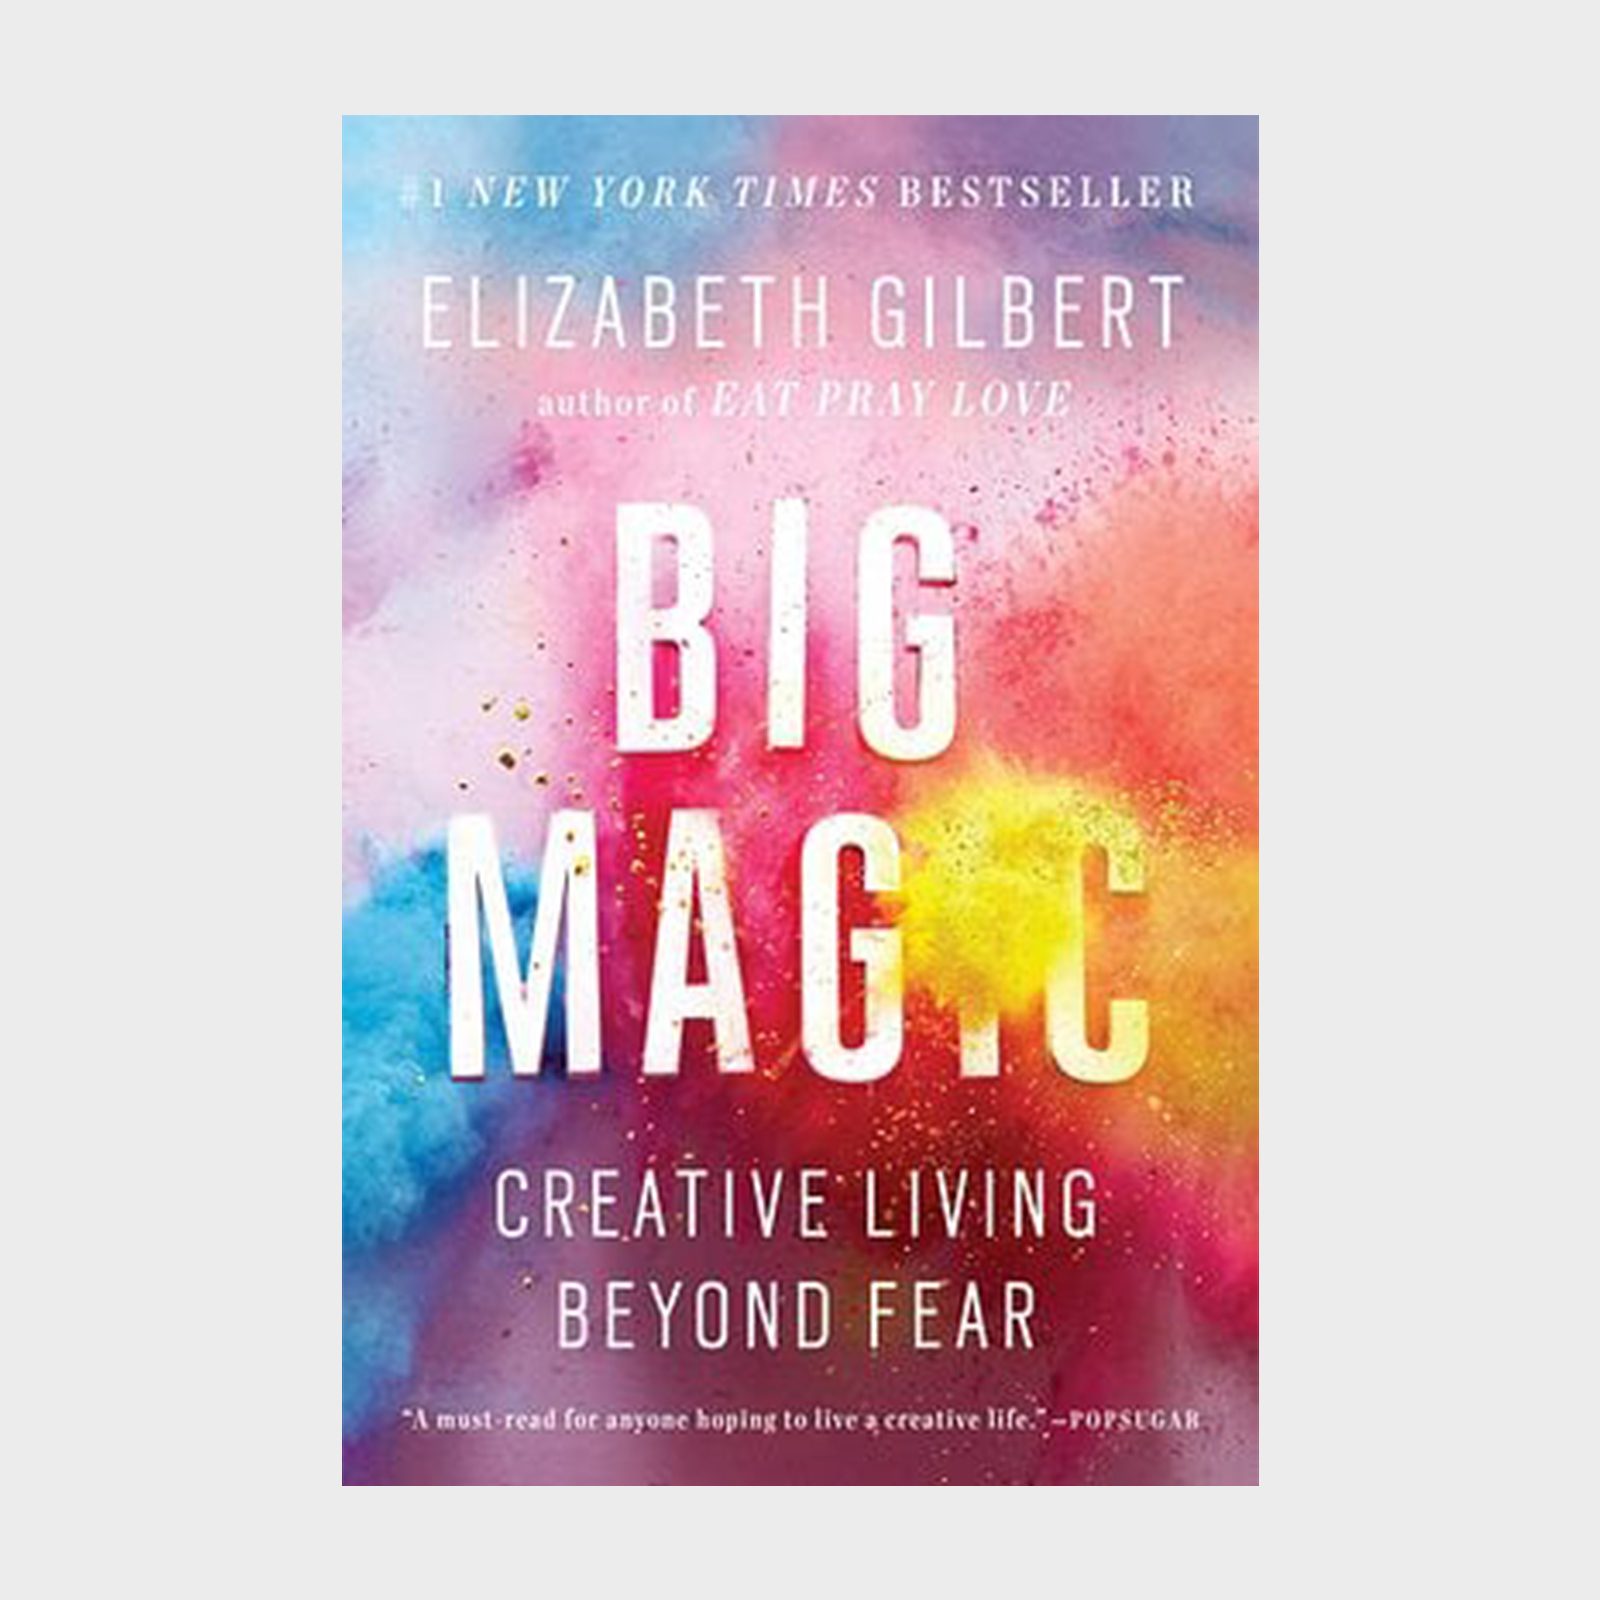 <p>If you've hit blocks in your work, home, or creative life, this book is for you. It reminds us how to open ourselves to possibility and enjoy the process. Whether or not you're a fan of Elizabeth Gilbert's famous memoir <em>Eat, Pray, Love</em>, you'll fall in love with <em>Big Magic</em> and its ability to shift your perspective. Gilbert shows how any life can be viewed as a creative life and how "no pain, no gain" doesn't have to be the mantra we live by. Rather, we can appreciate the creativity that lives in every being and let ourselves be surprised by what we make, instead of attaching it to a specific goal or outcome. A favorite self-development book since it was published in 2015, <em>Big Magic</em> will provide comfort and inspiration that lasts a lifetime.</p> <p class="listicle-page__cta-button-shop"><a class="shop-btn" href="https://bookshop.org/books/big-magic-creative-living-beyond-fear/9781594634727">Shop Now</a></p>